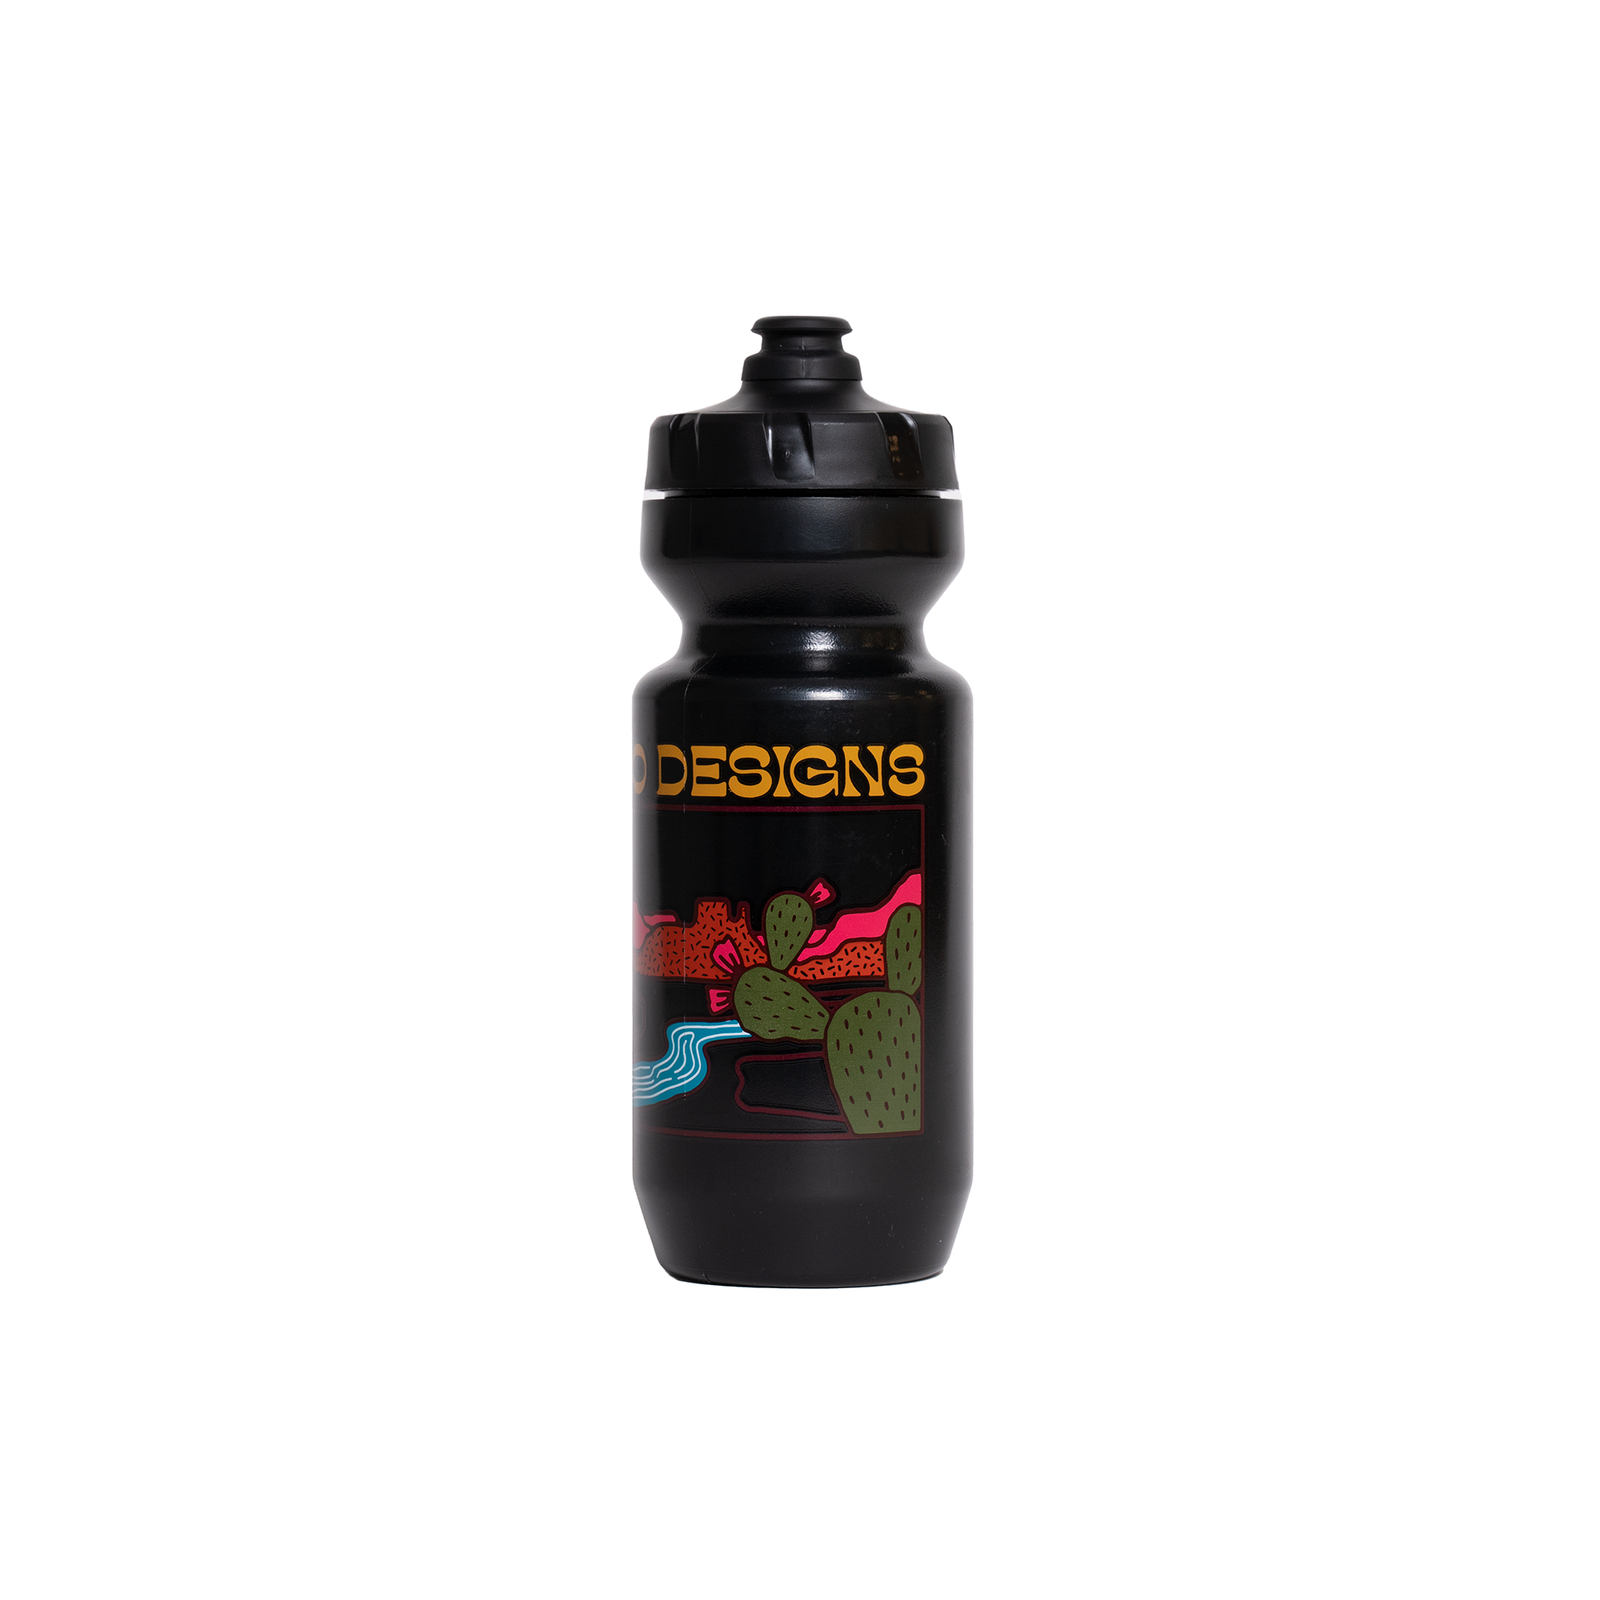 Topo Designs x Specialized Purist 22oz cycling Water Bottle in "Cactus" black.